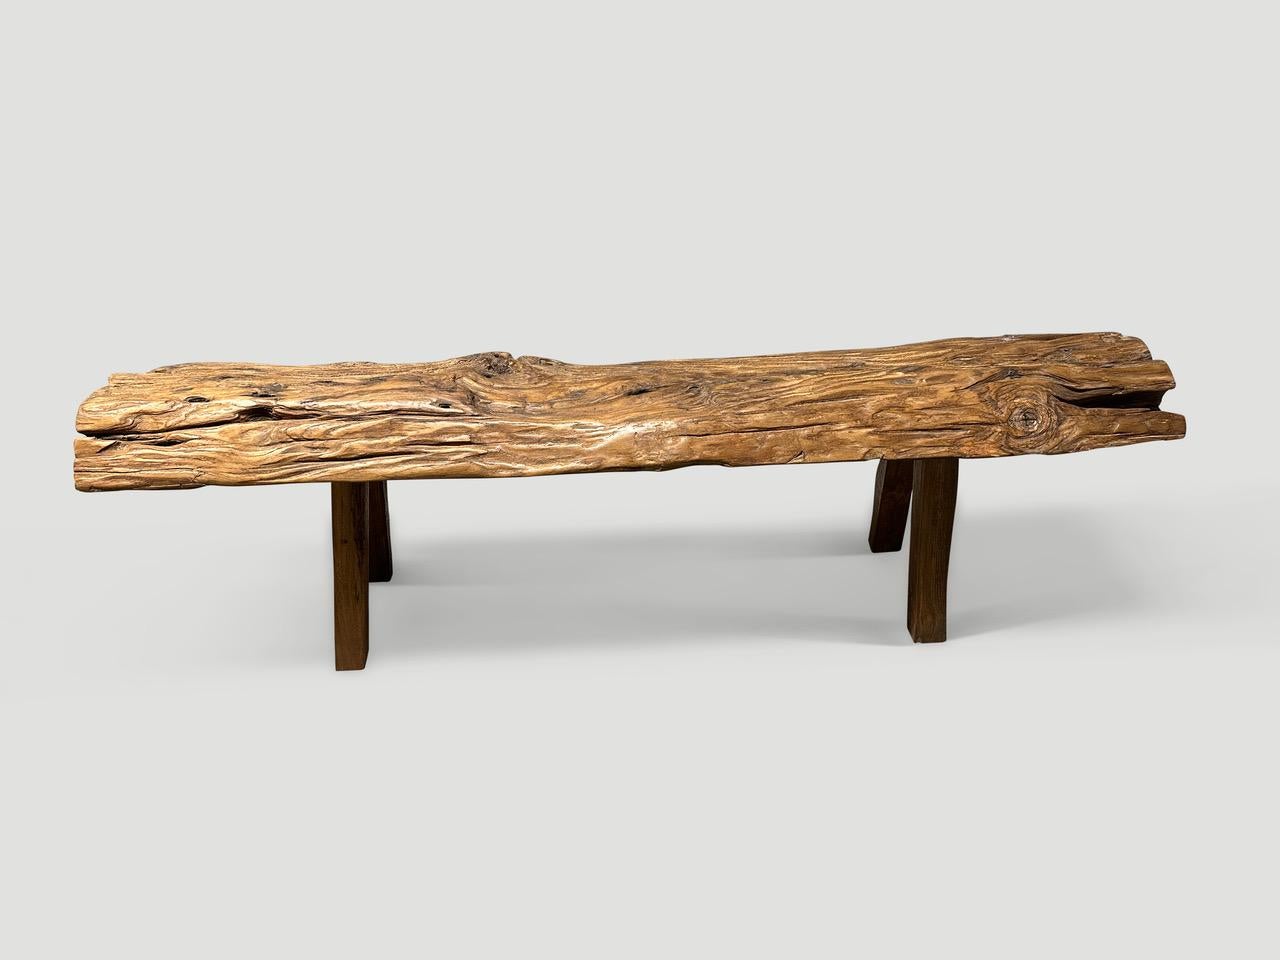 Antique bench with beautiful character hand made from a single thick teak log with lovely patina. Both usable and sculptural. Circa 1950.

This bench was hand made in the spirit of Wabi-Sabi, a Japanese philosophy that beauty can be found in